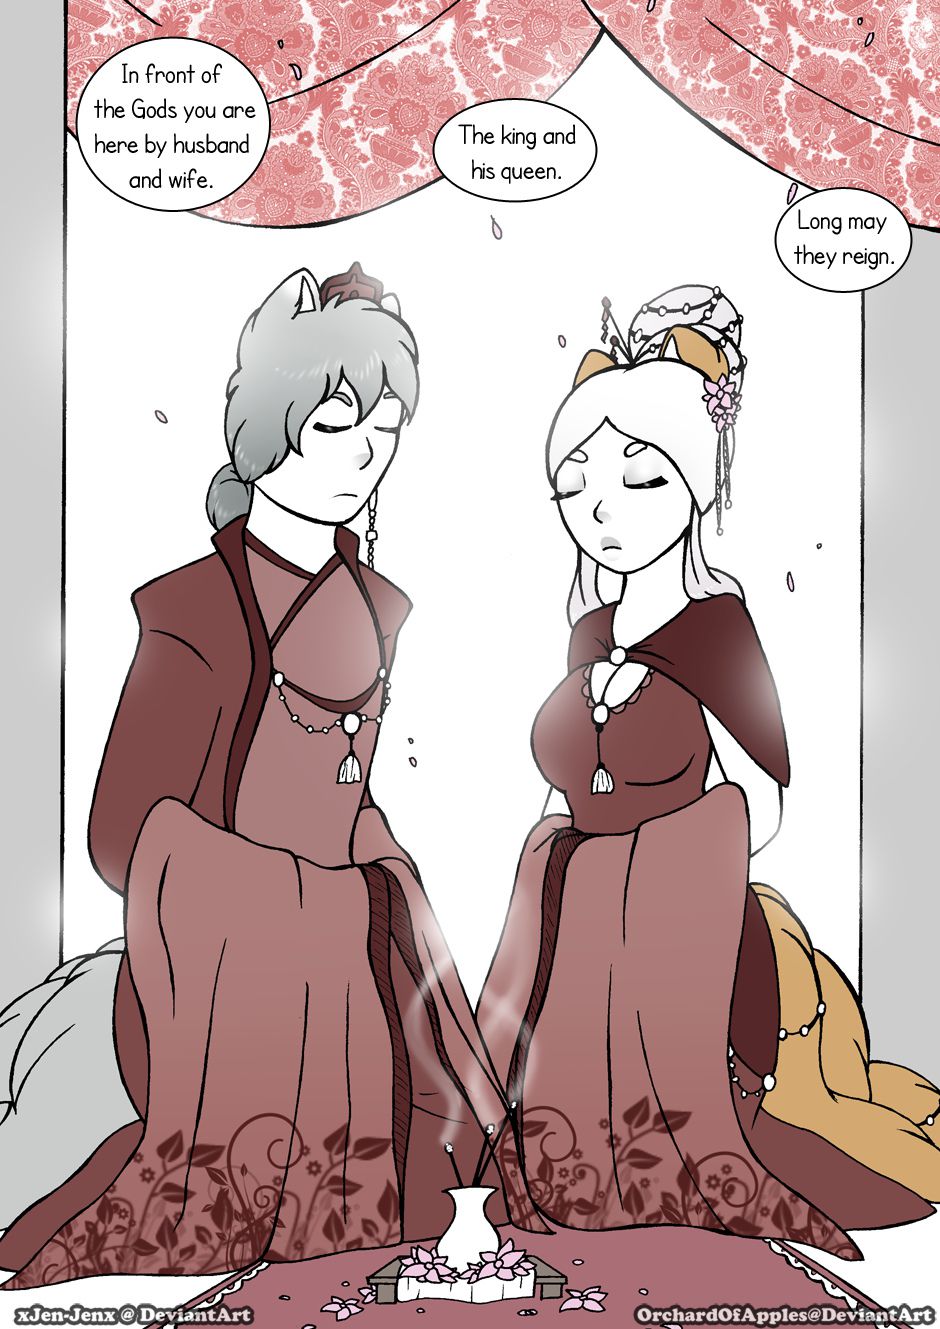 [Jeny-jen94] Between Kings and Queens [Ongoing] 242